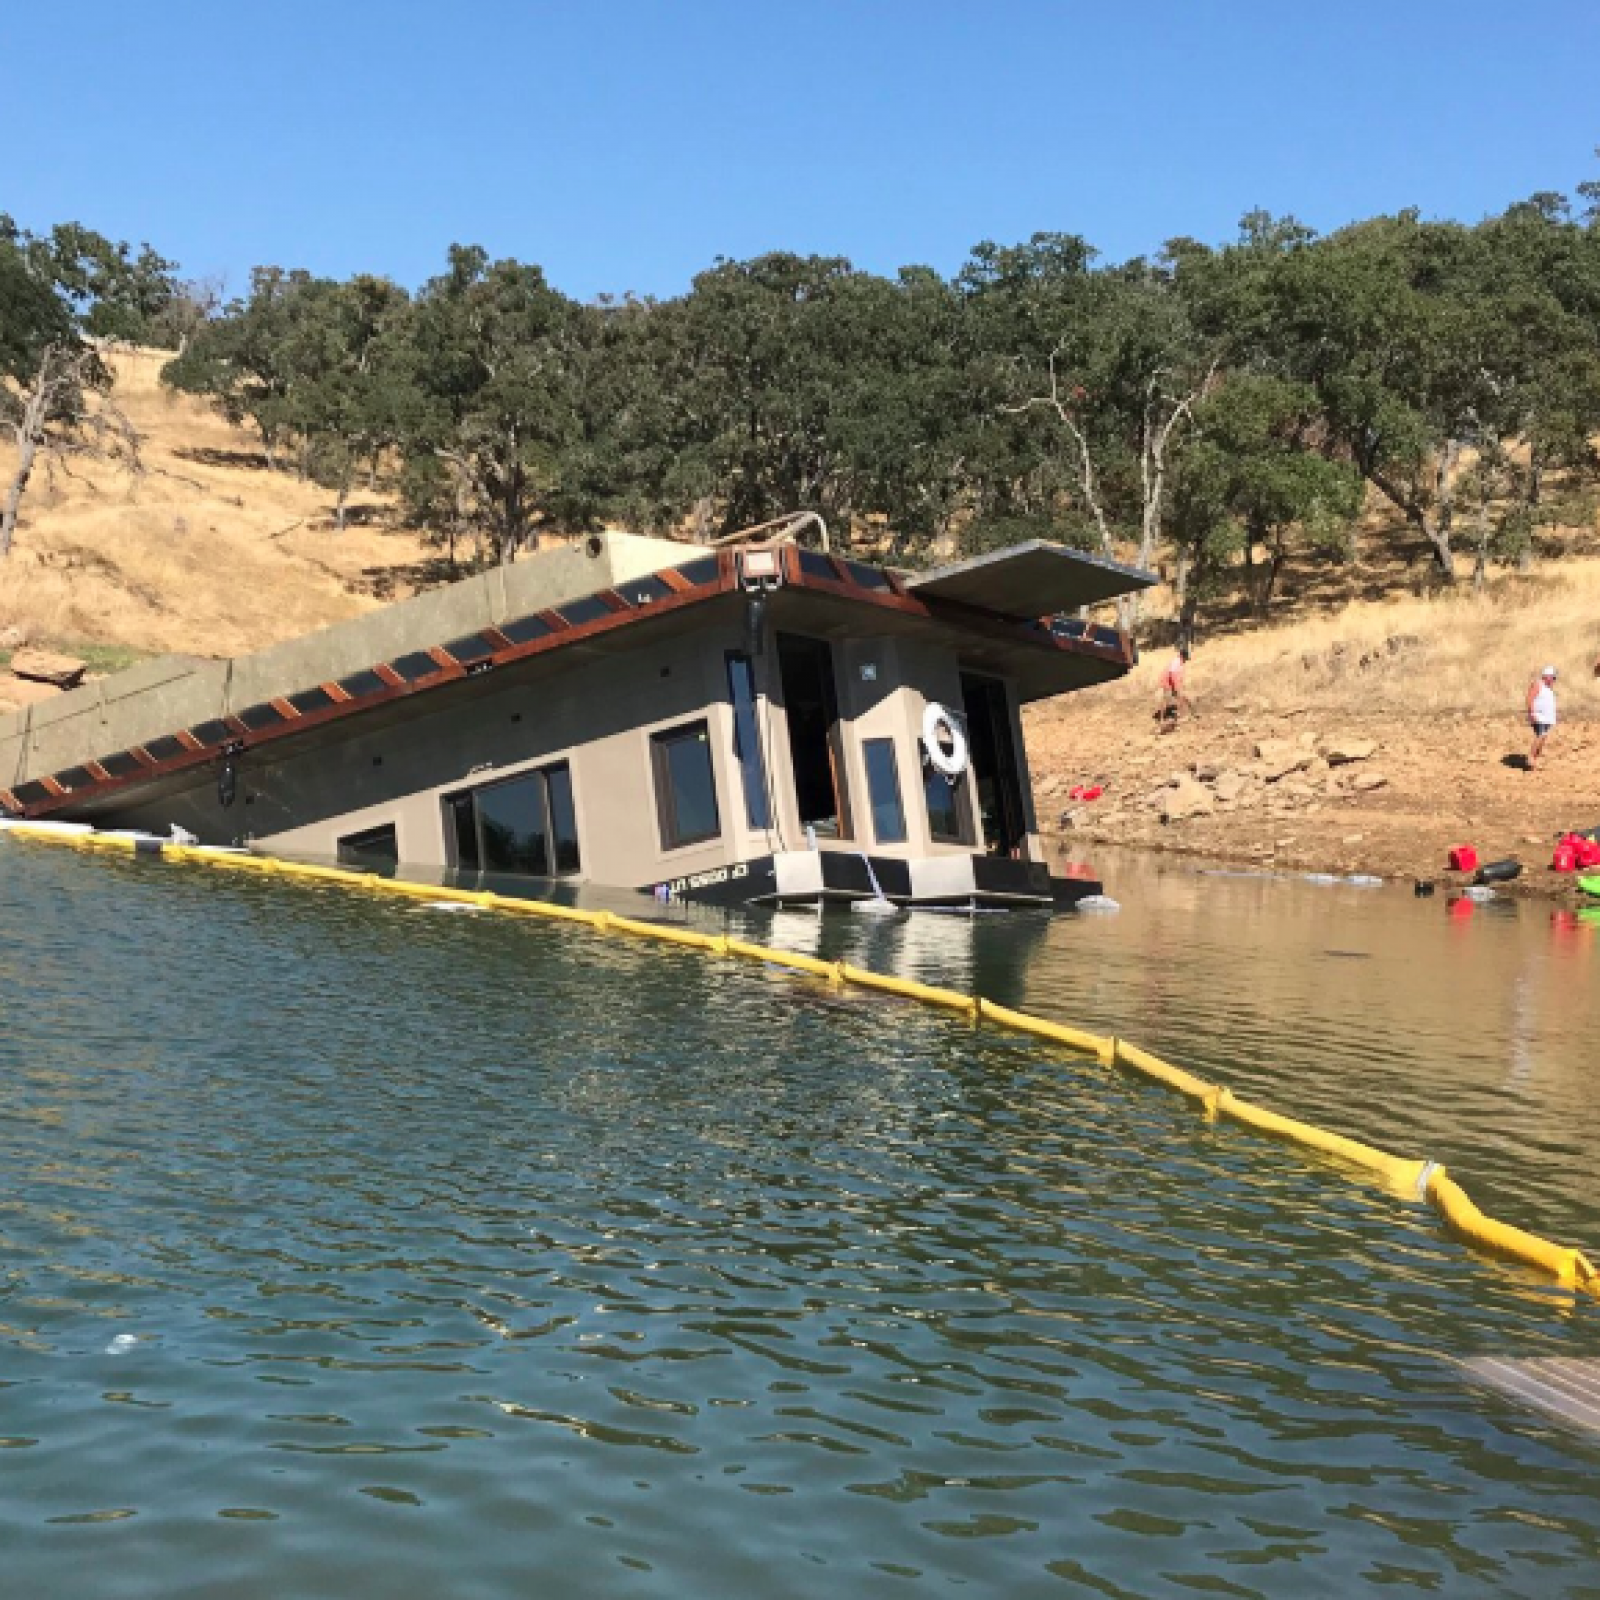 California Houseboat Sinks During Overloaded Poker Party